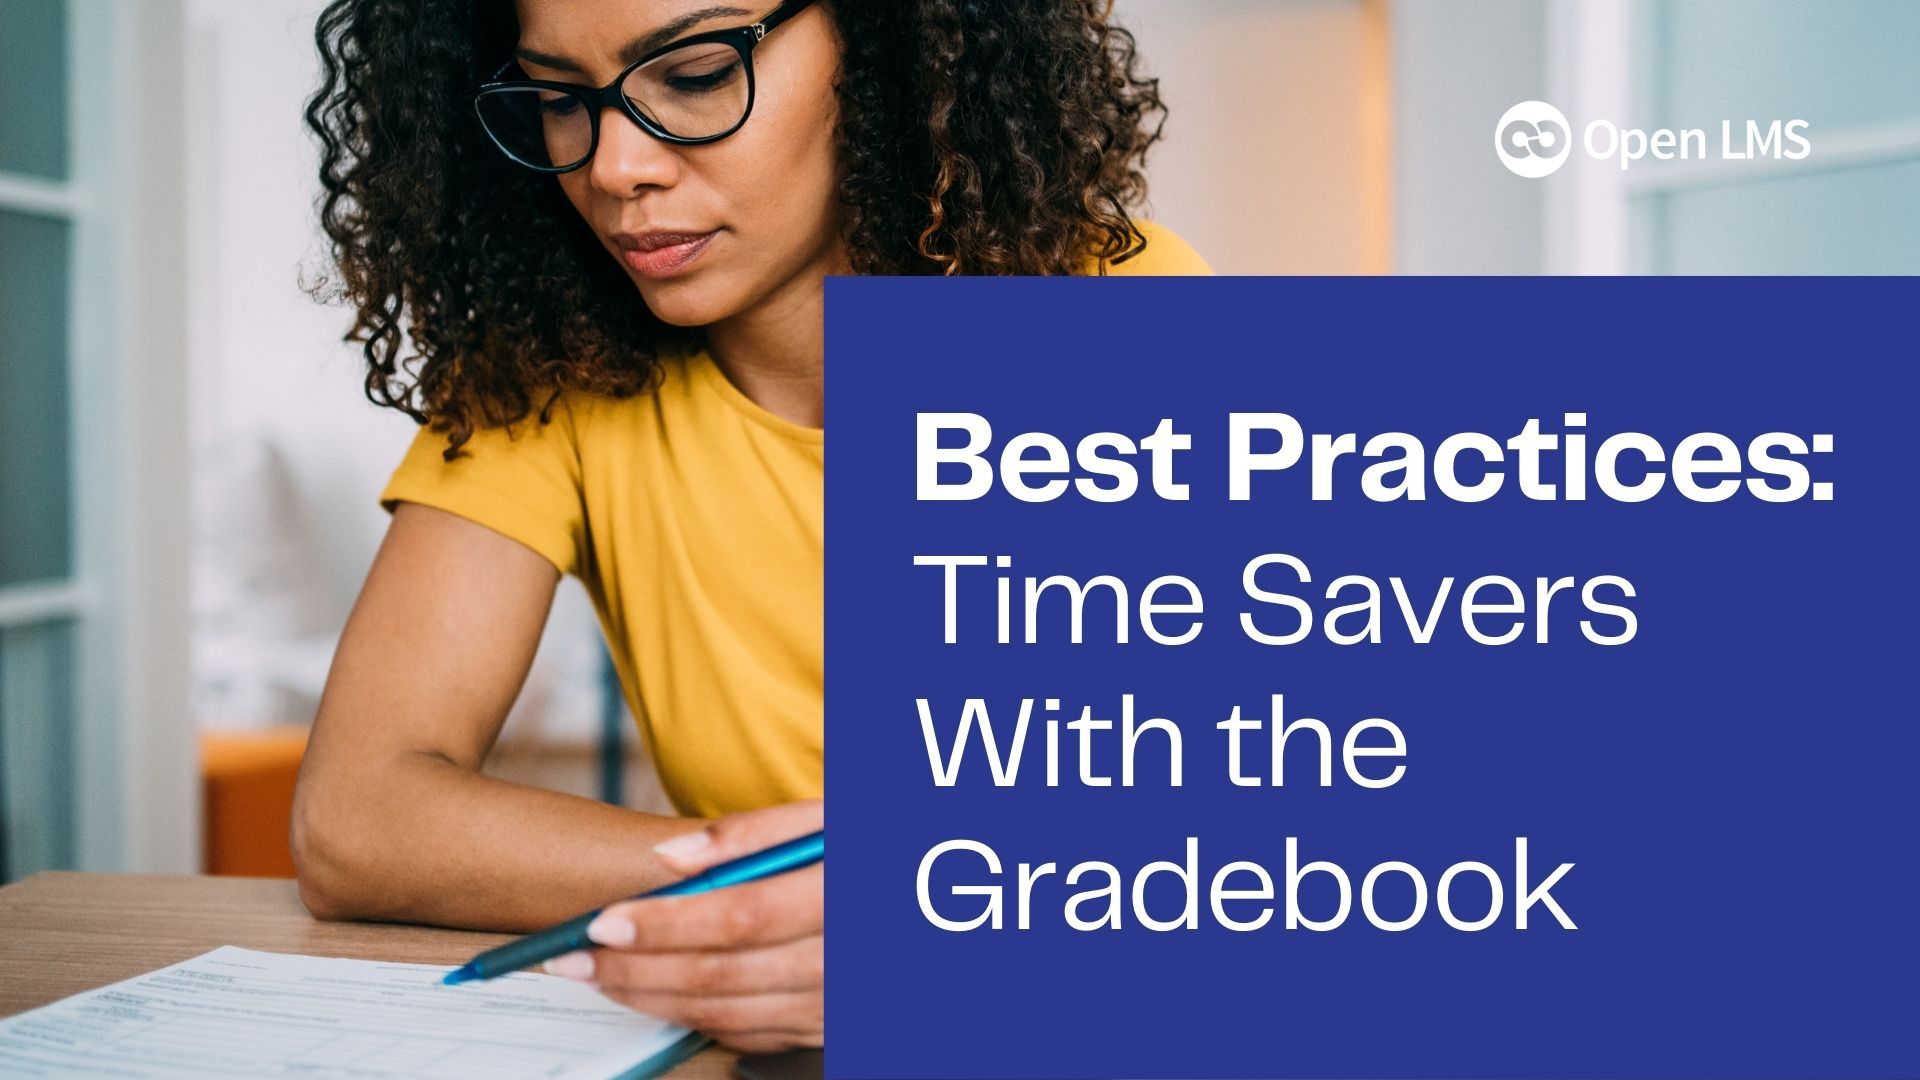 Best practices: Time savers with the Gradebook